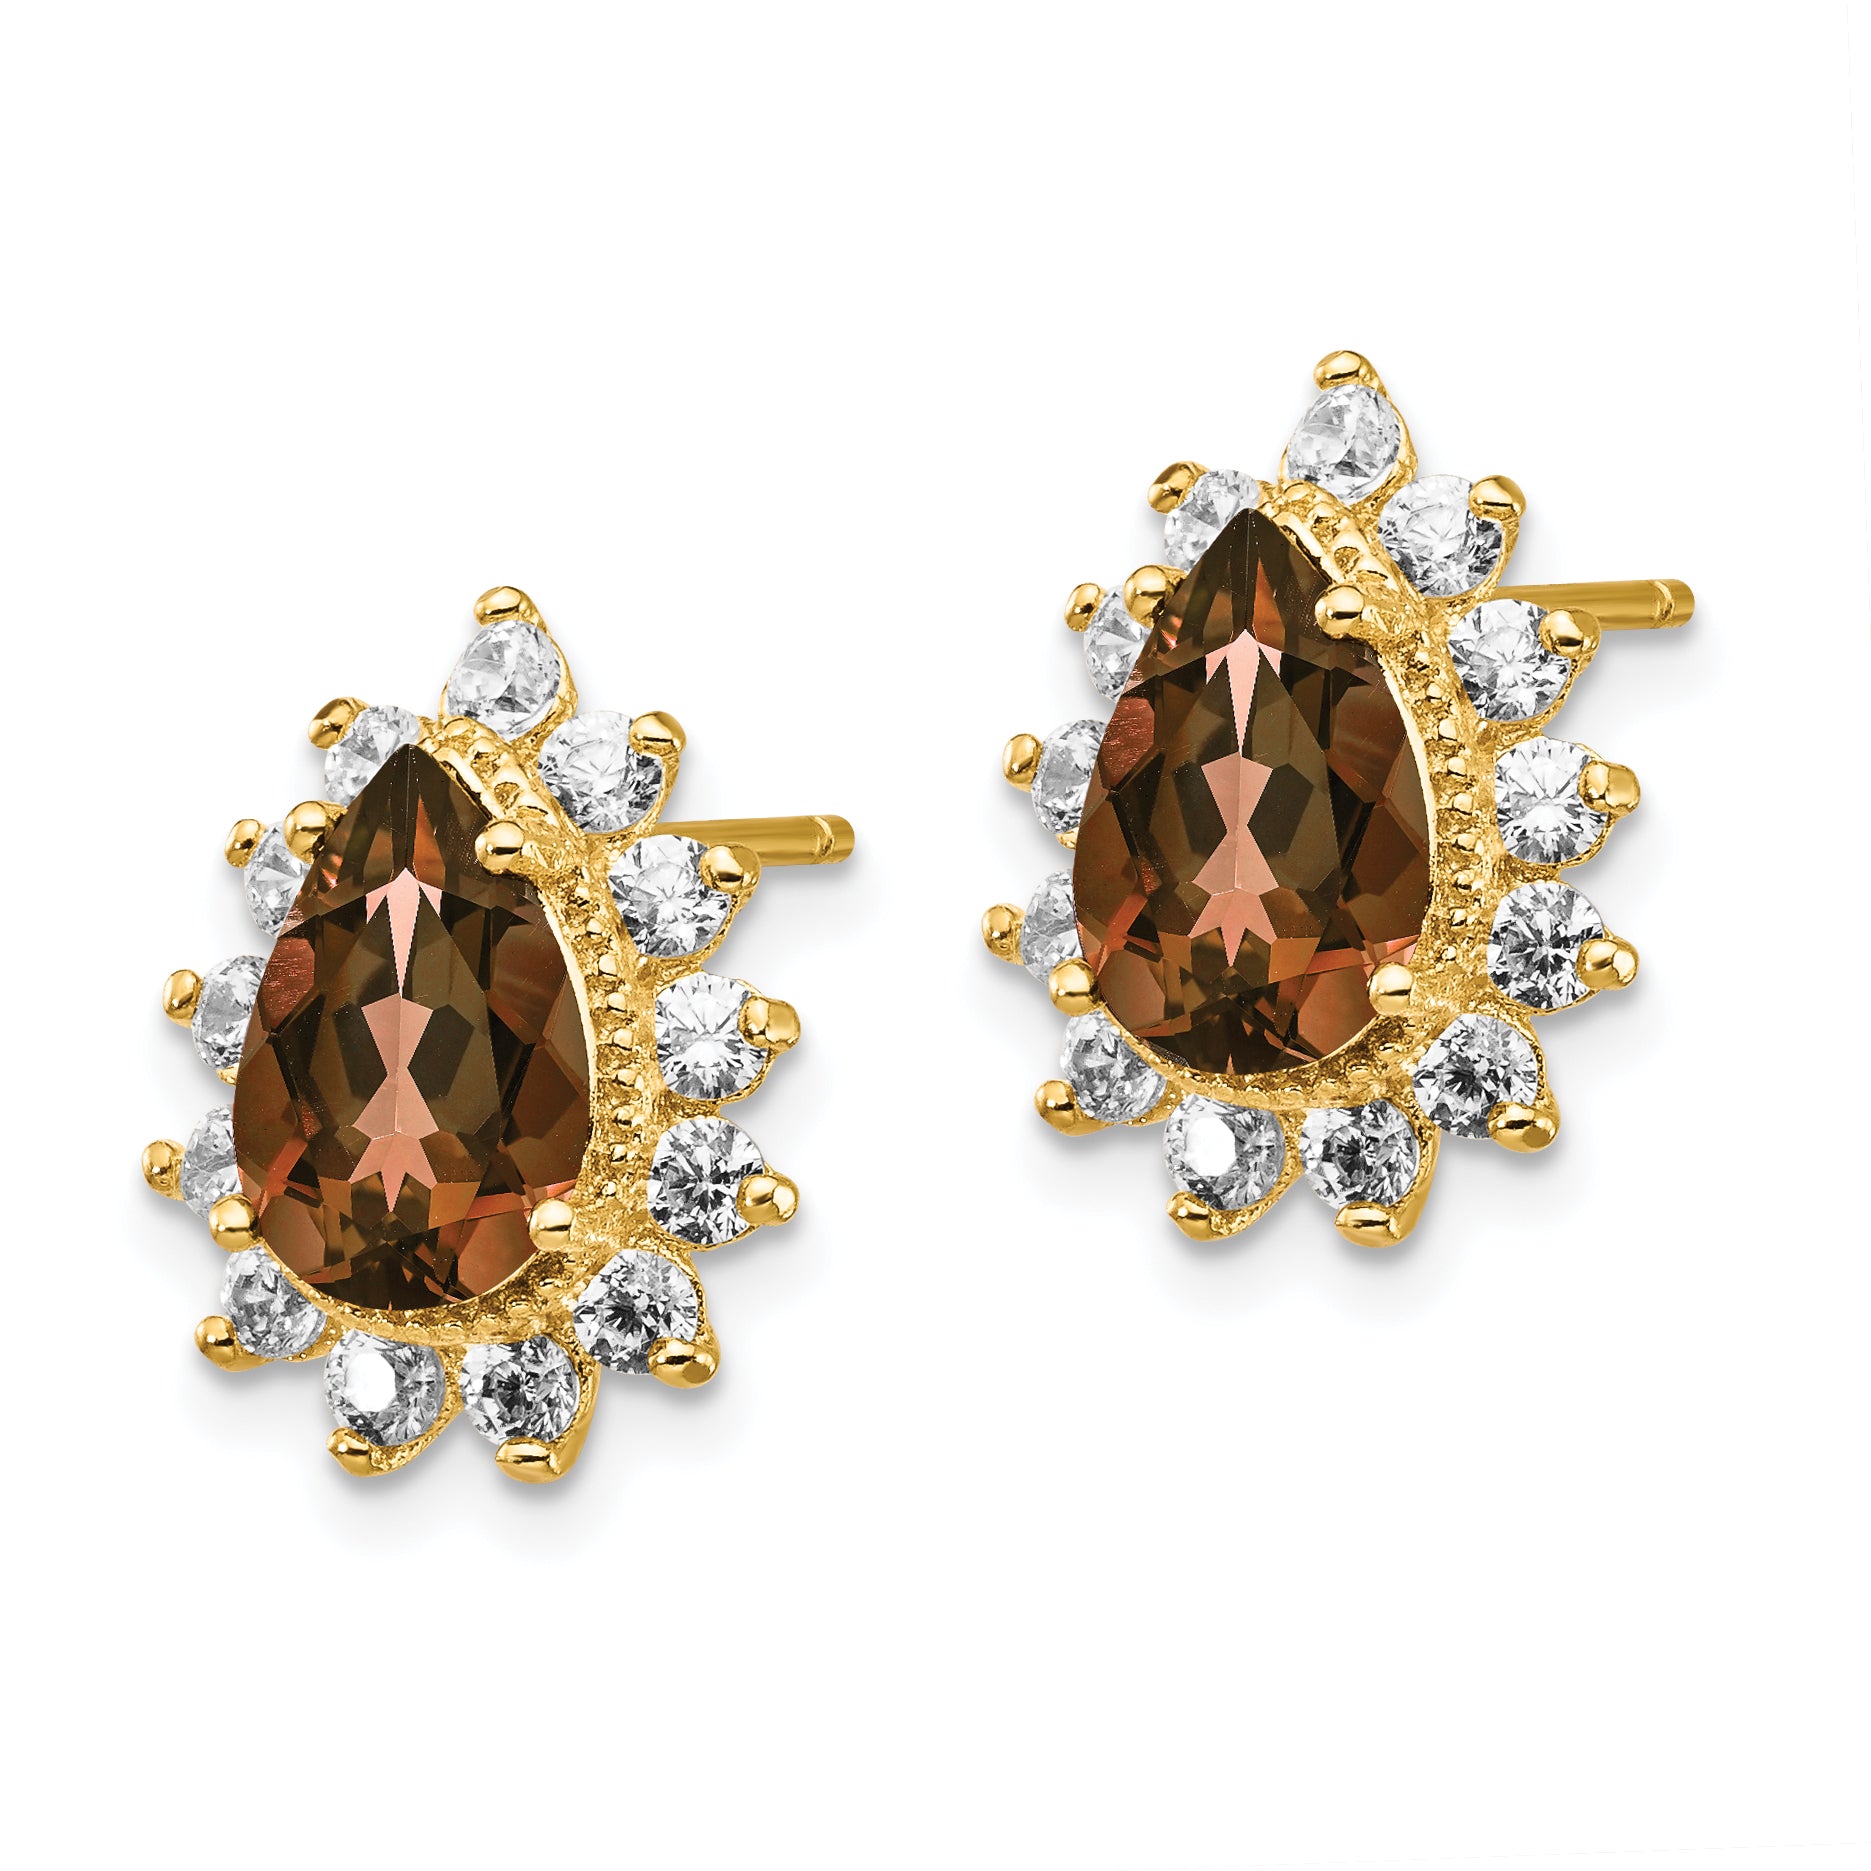 Cheryl M Sterling Silver Gold-plated Brilliant-cut Brown and White Pear Shape CZ Post Earrings